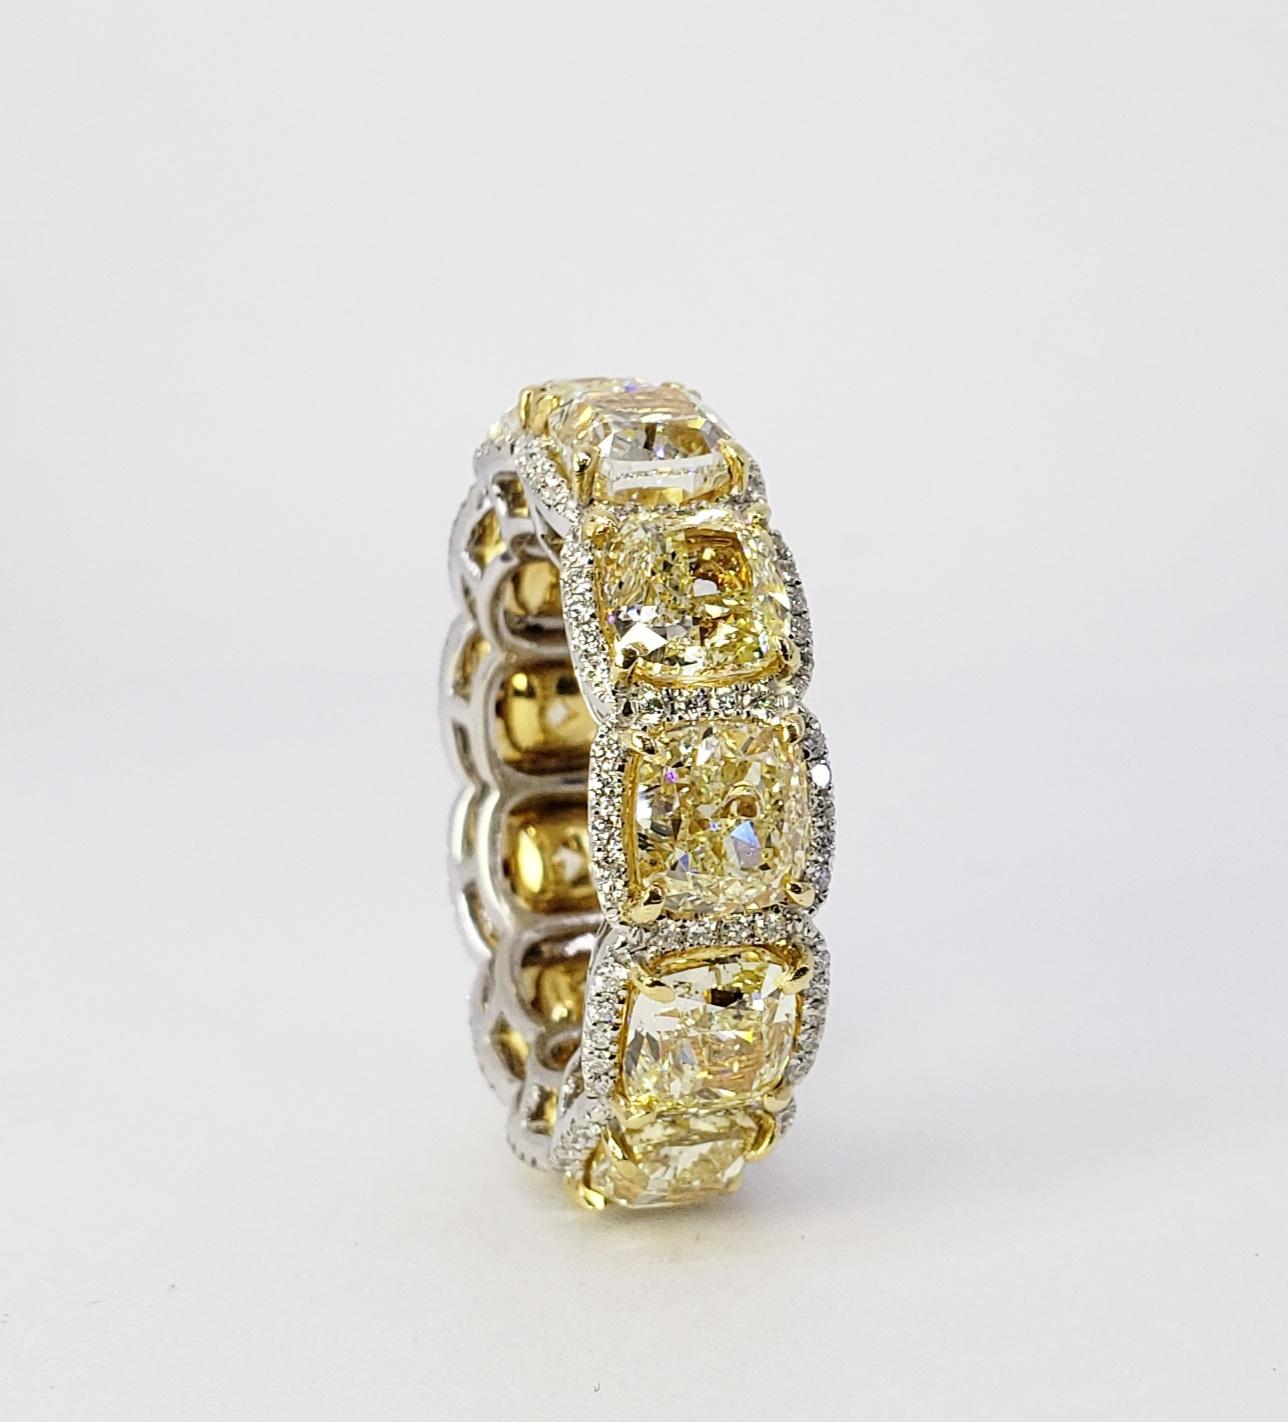 Rosenberg Diamonds & Co. 12.74 total carat weight Cushion cut Fancy Yellow SI-VS clarity. This beautiful yellow diamond eternity band is set in a handmade 18 karat yellow gold setting, with twelve carefully matched cushion shape diamonds surrounded